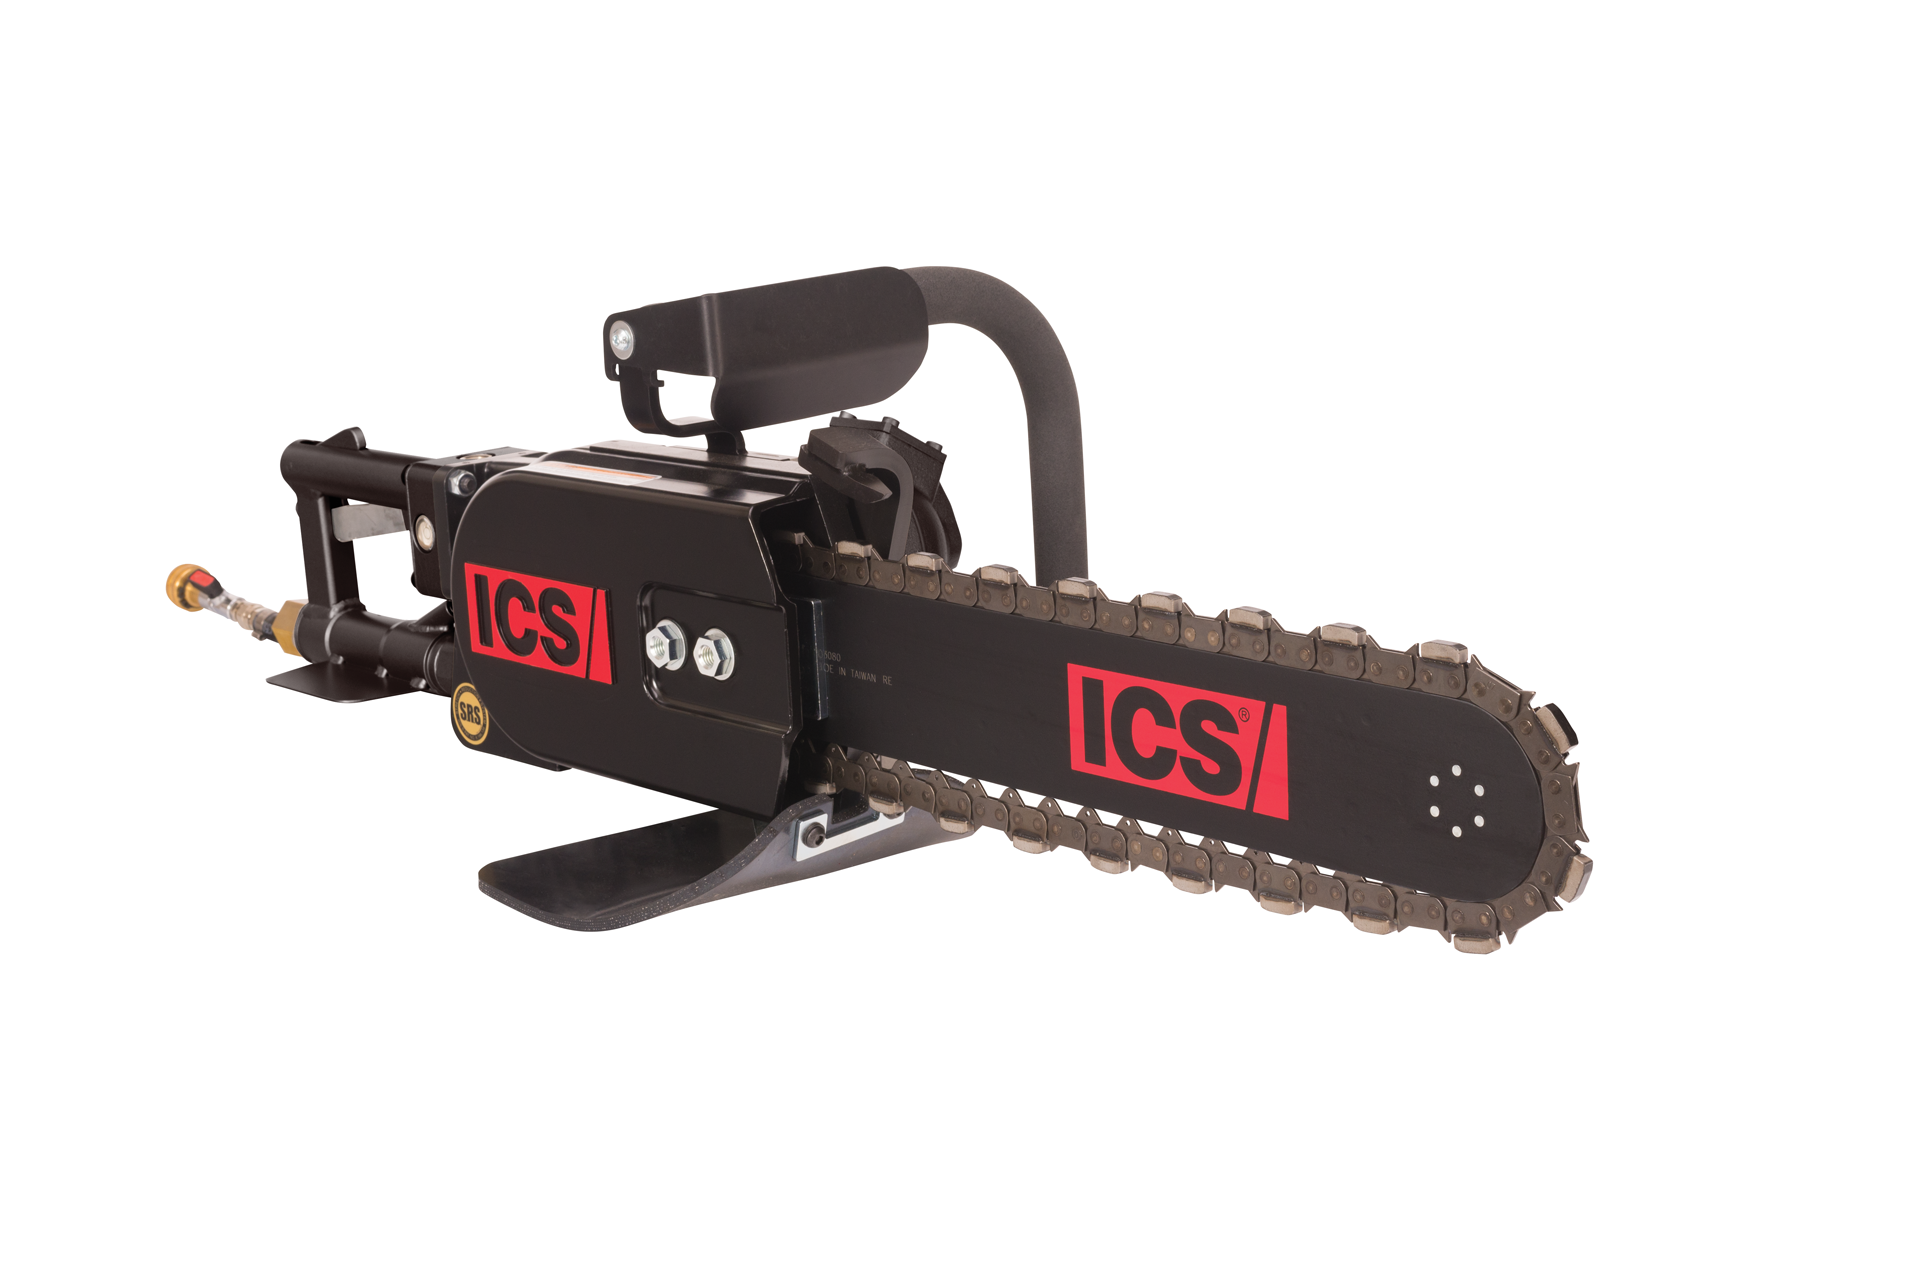 701A Pneumatic-Powered Chain Saw